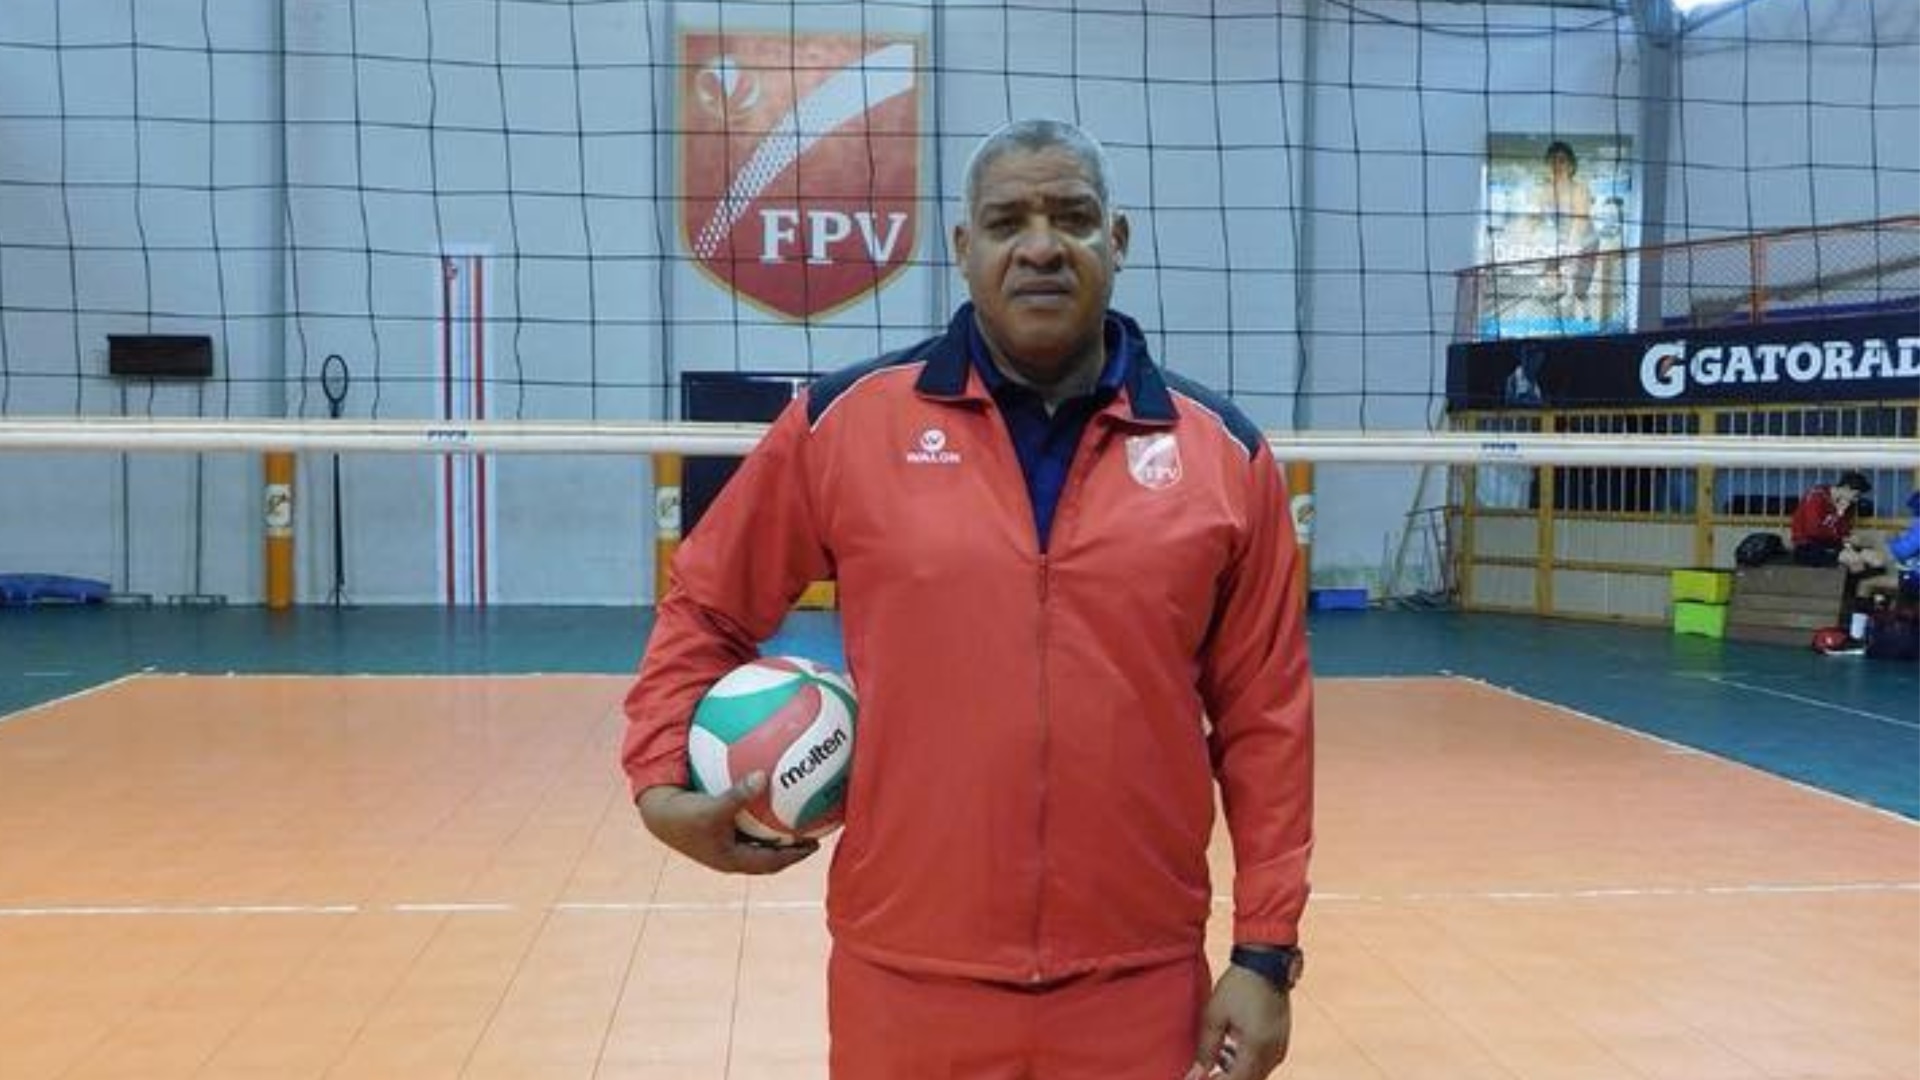 Juan Carlos Gala is the coach of the national men's volleyball team (FPV)